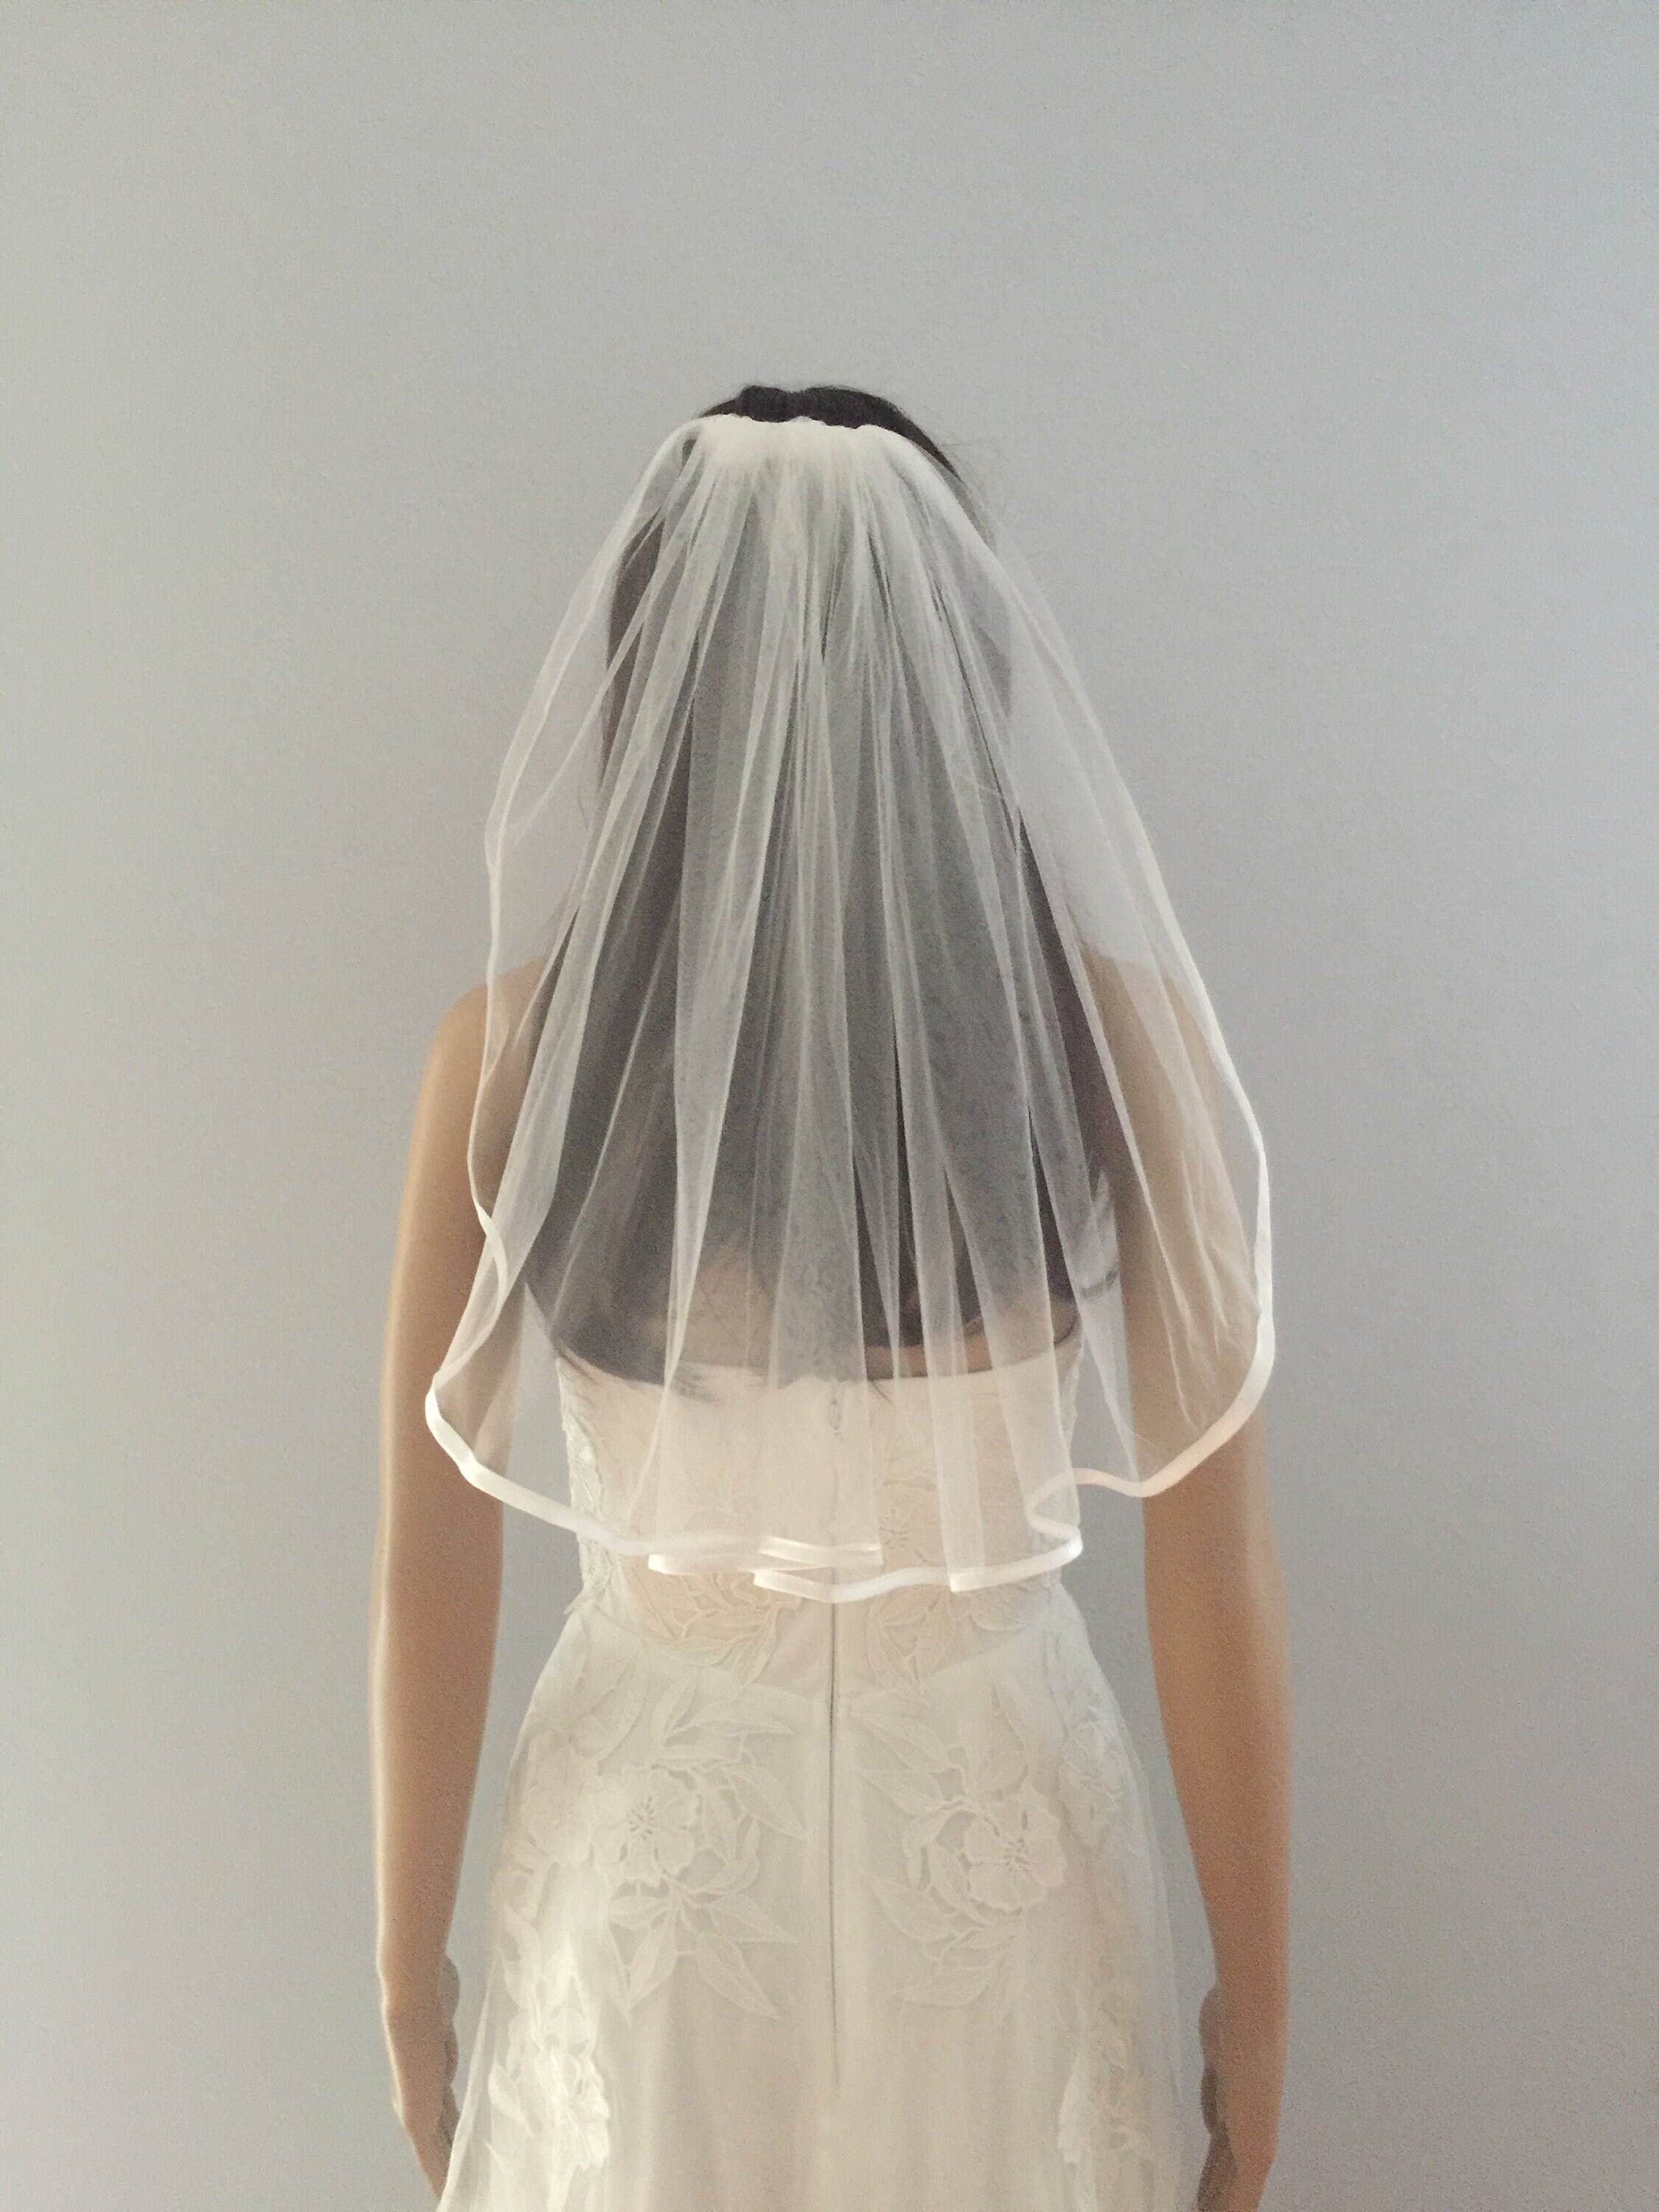 READY TO SHIP Shoulder Single Tier 1T Wedding Veil with Fine | Etsy